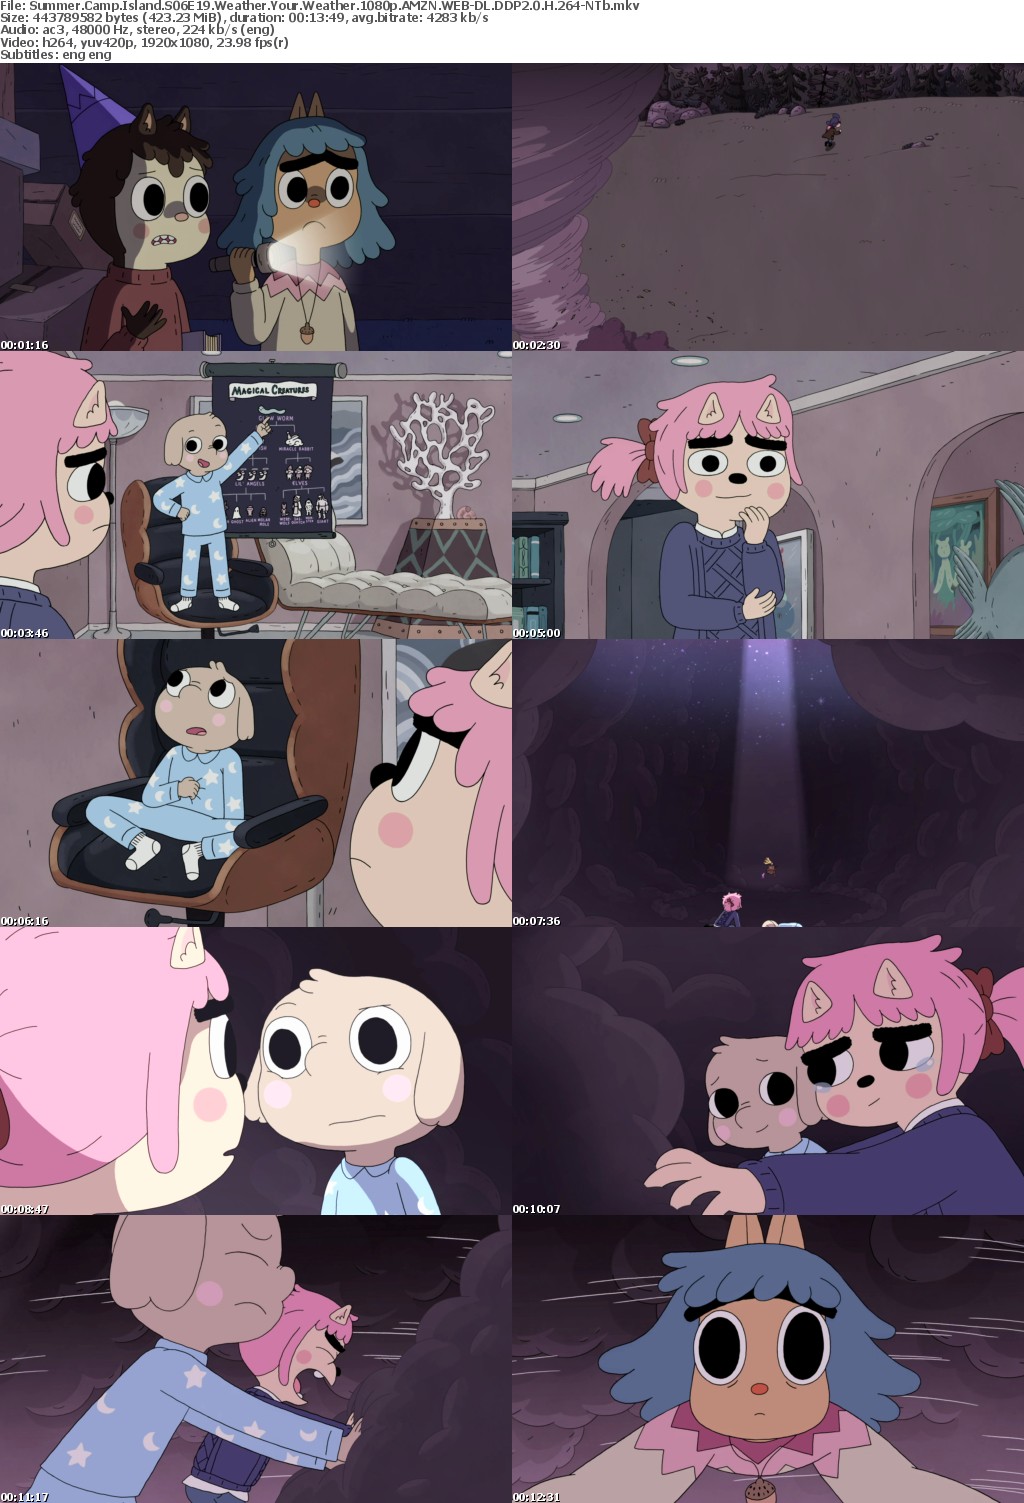 Summer Camp Island S06E19 Weather Your Weather 1080p AMZN WEB-DL DDP2 0 H 264-NTb